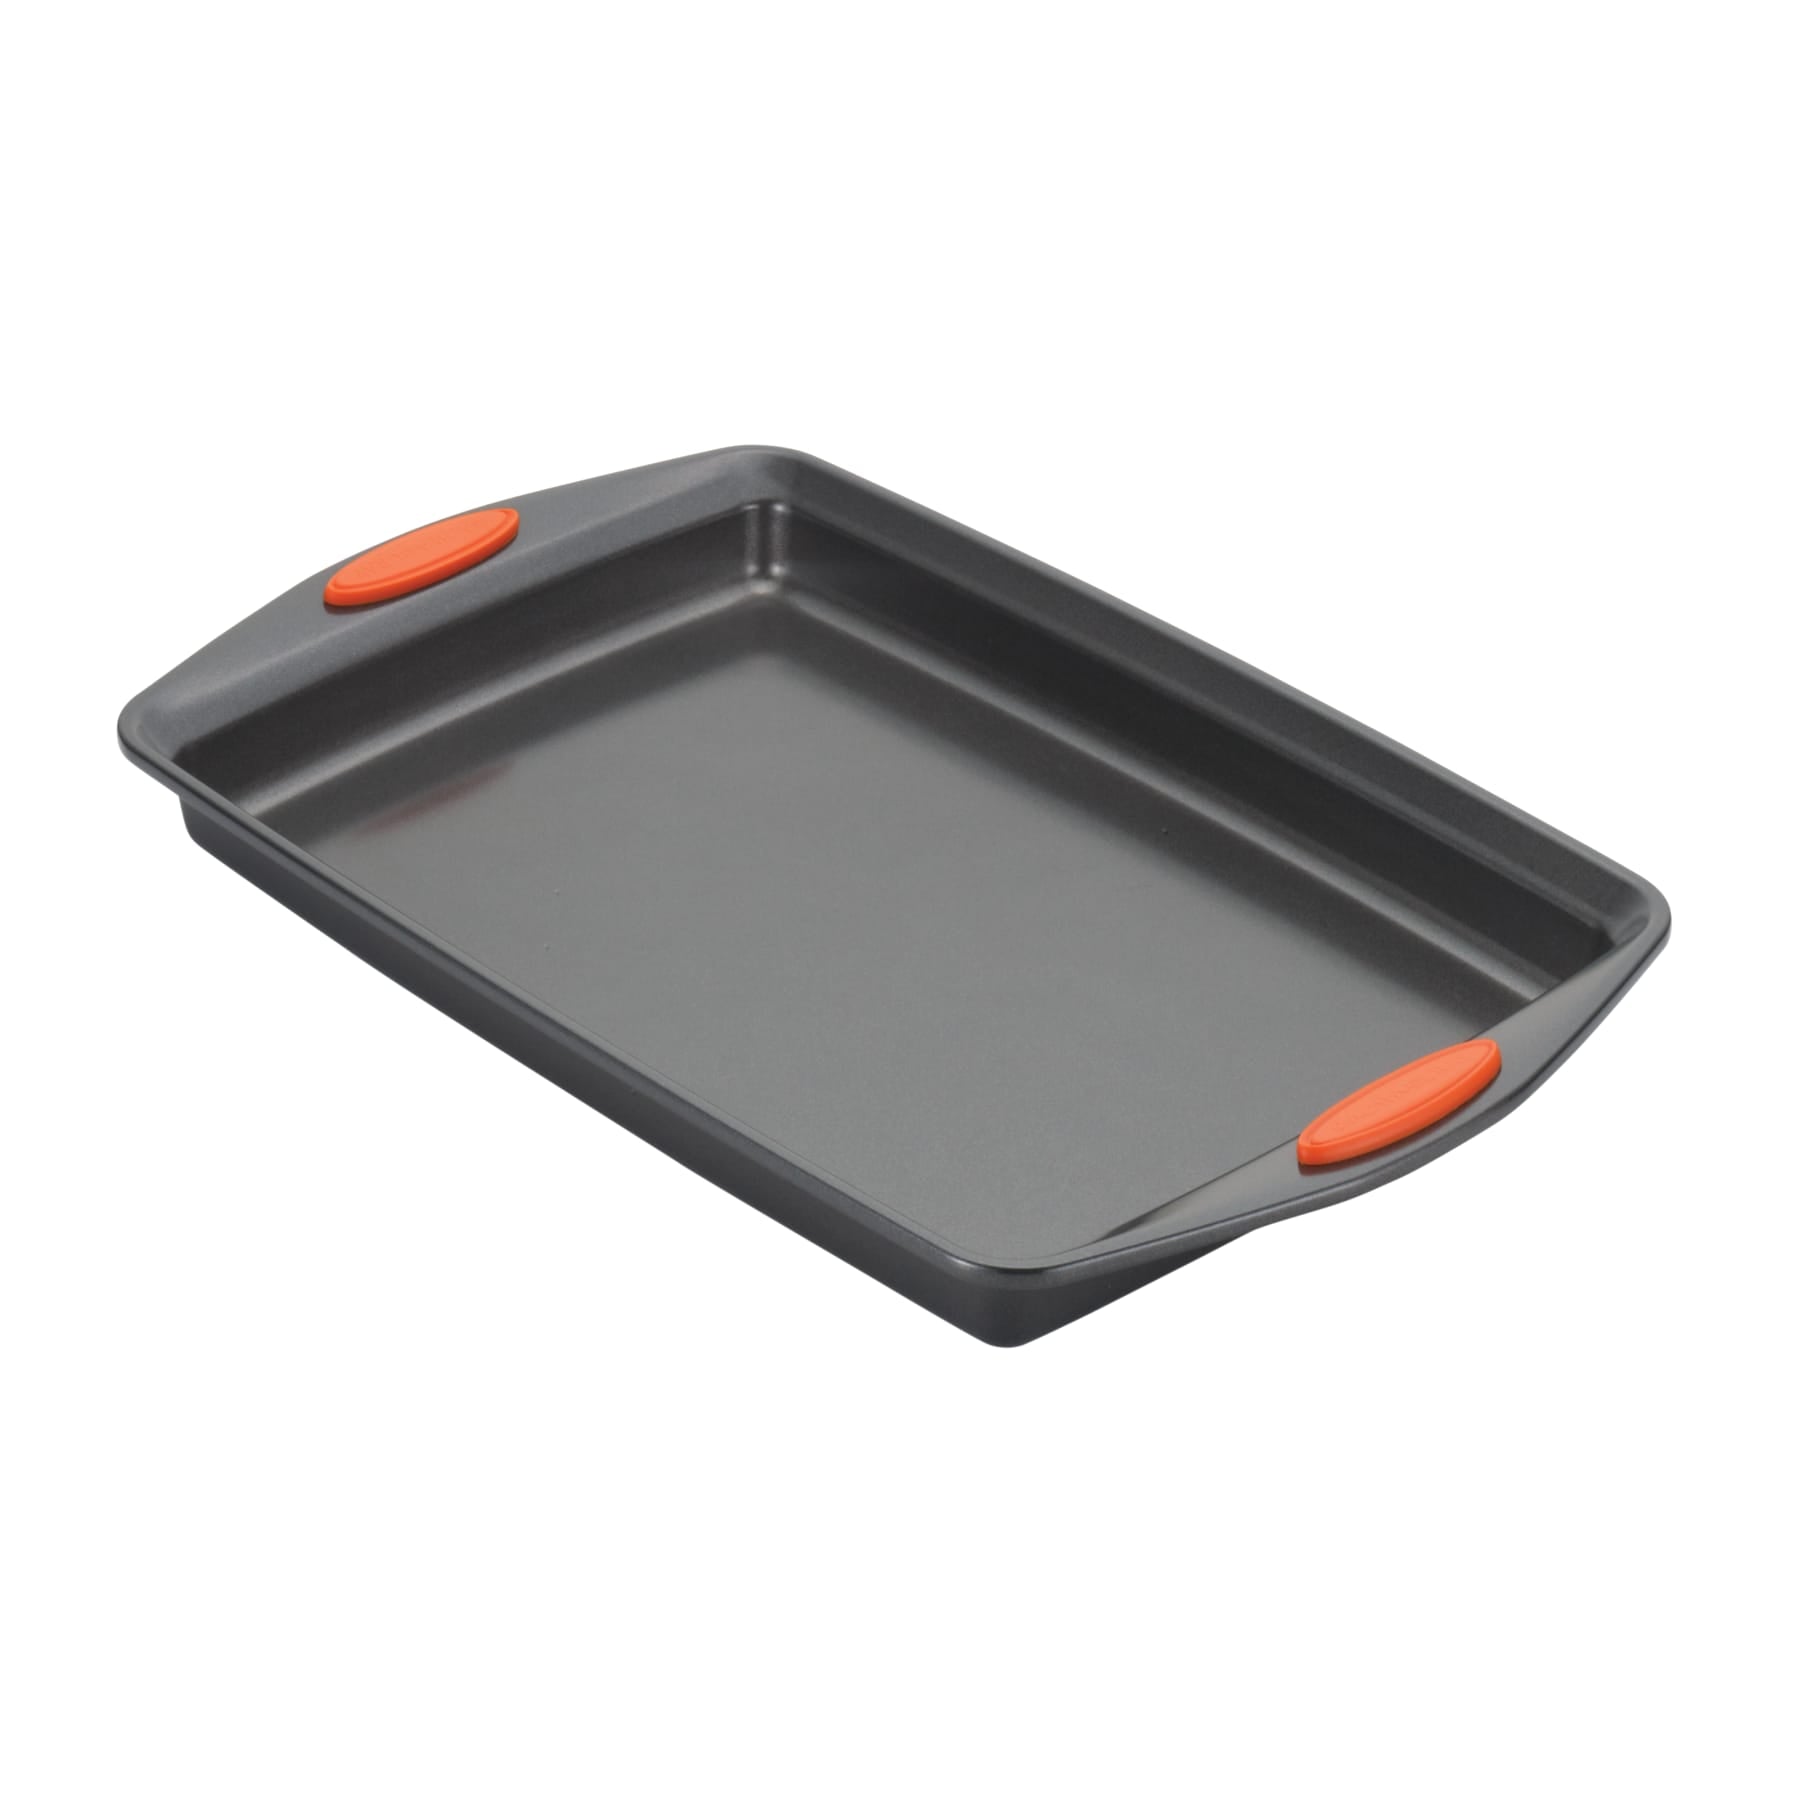 Rachael Ray Yum-O Nonstick Bakeware Oven Lovin' Rectangle Baking Cake Pan, 9  Inch by 13 Inch & Reviews